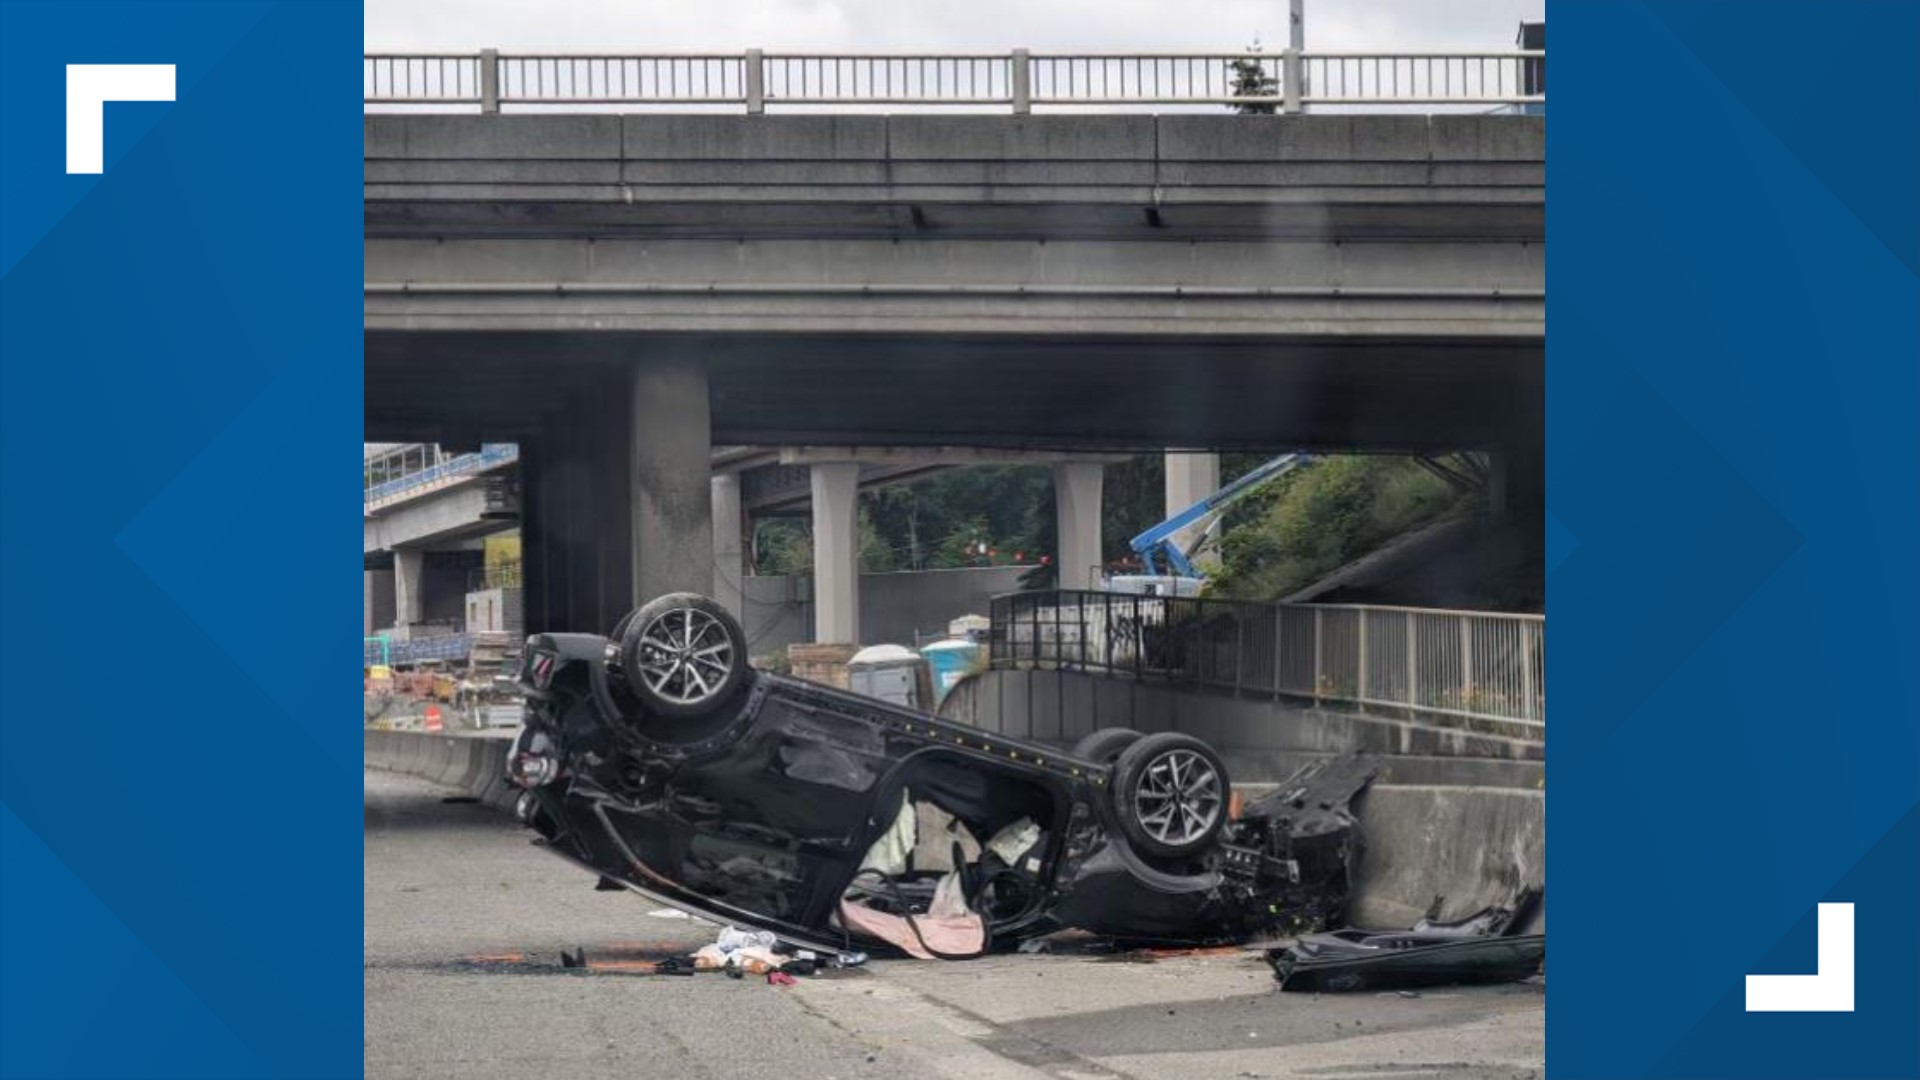 A driver from Shelton was taken into custody for vehicular assault after the accident that closed all lanes of the freeway for more than two hours.